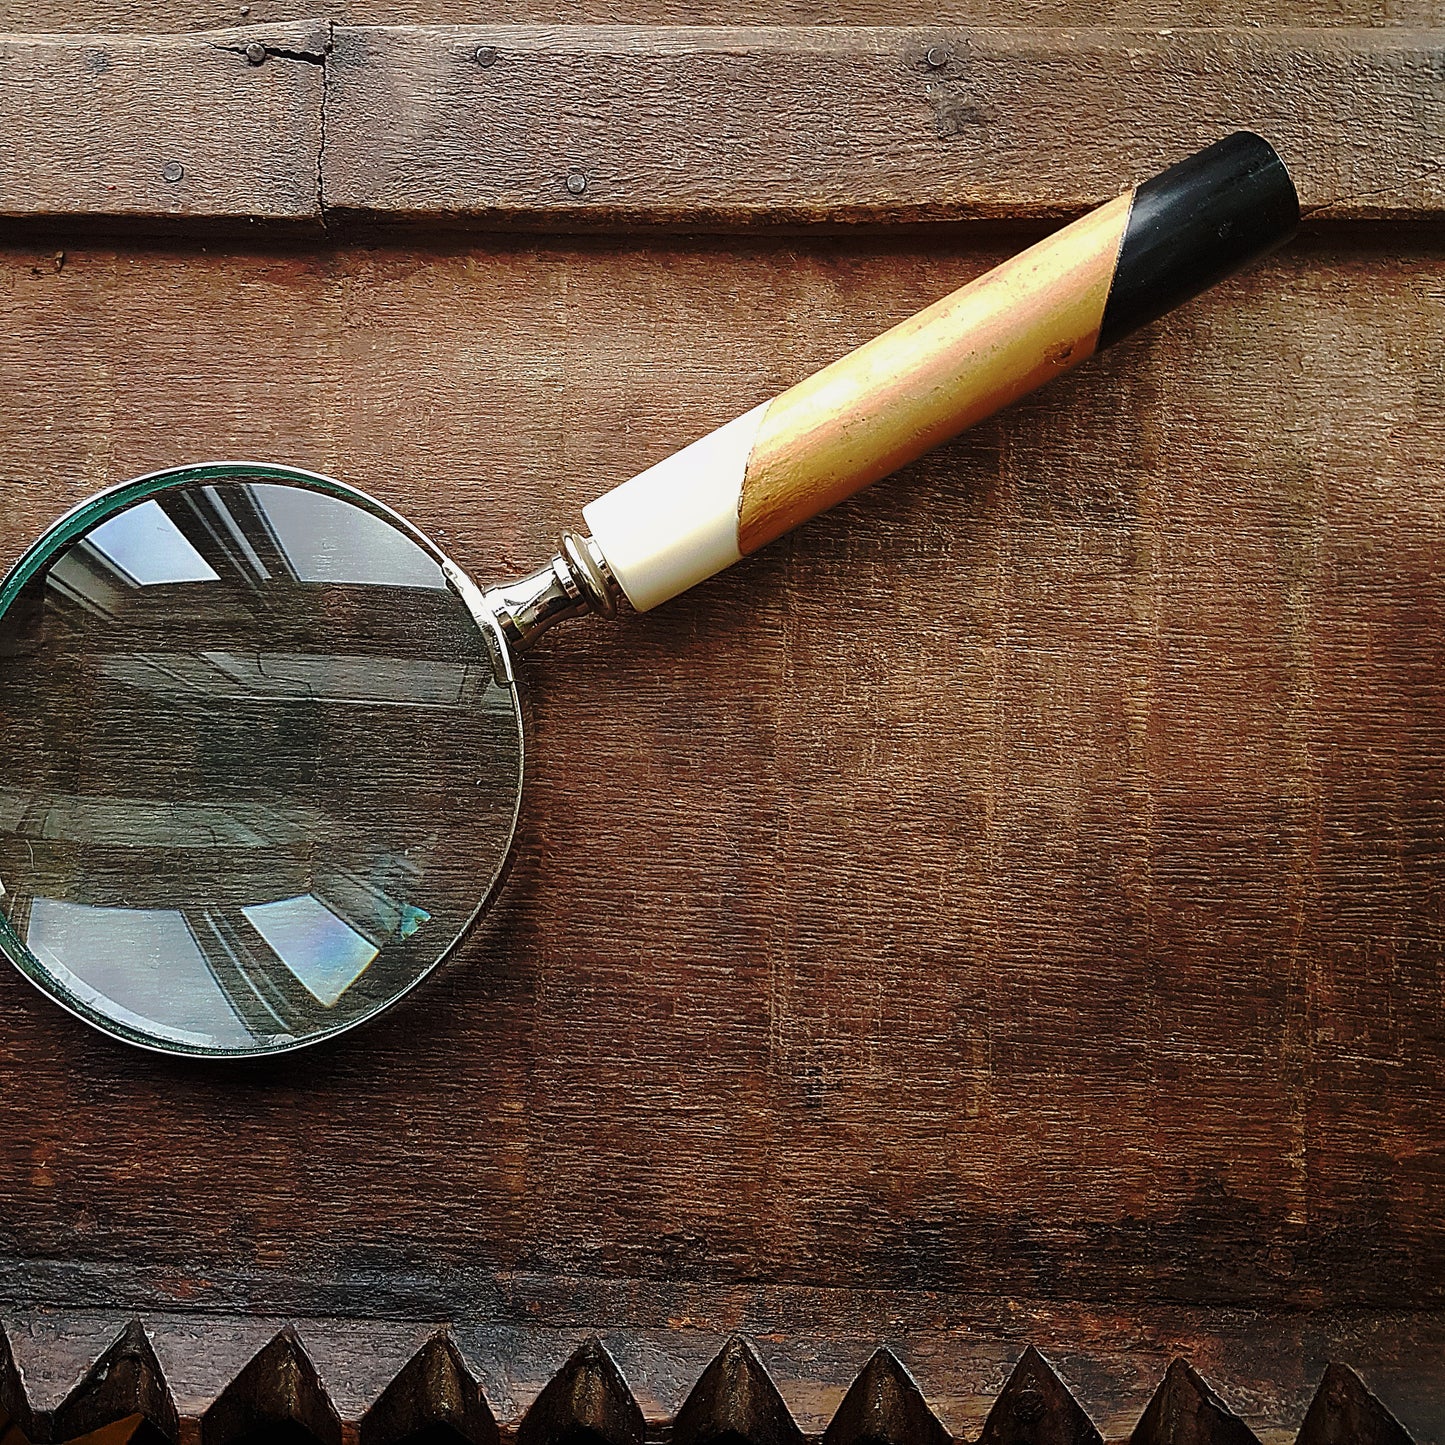 Magnifying glass hand lens in a vintage nautical style 10 inches long. 4 inch diameter lens with a marquetry design handle. Gift boxed.